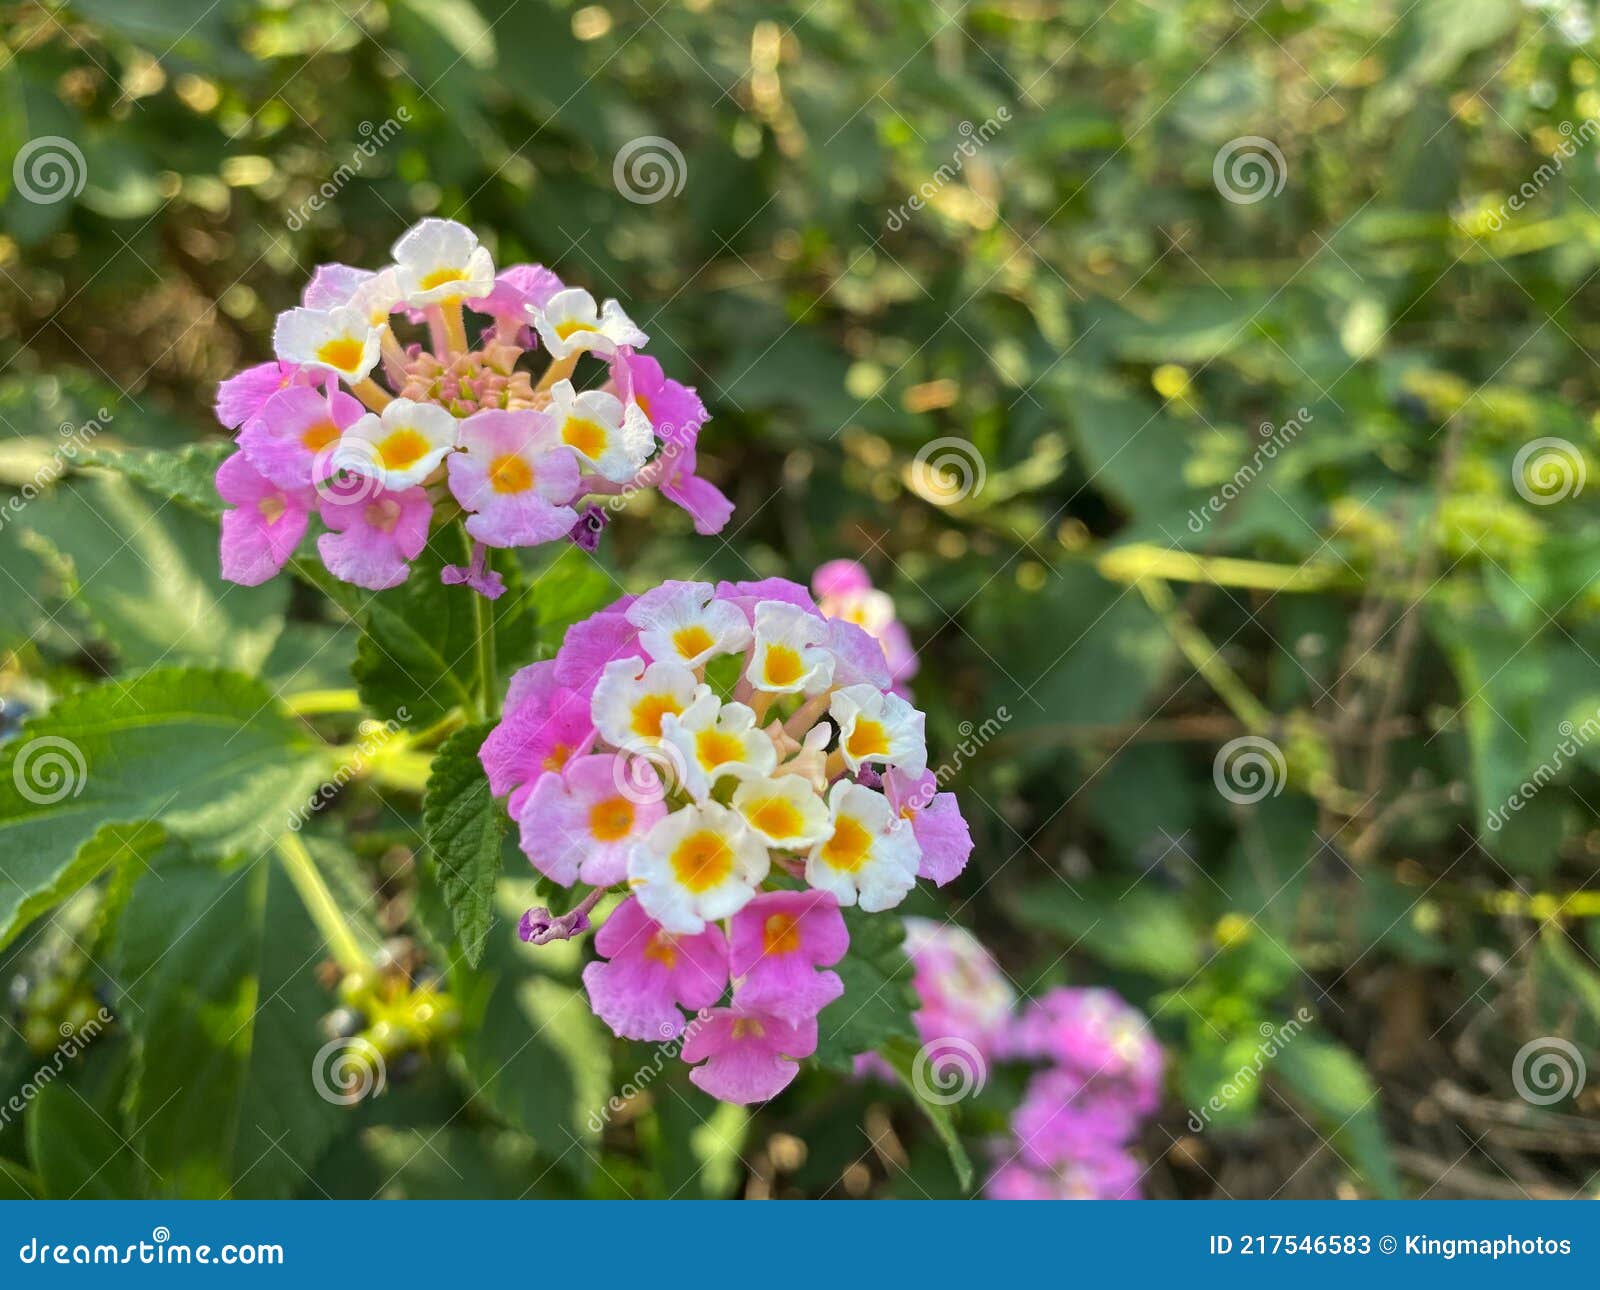 Vibrant Lantana Camara Flower. Tropical White and Yellow Flower in the  Sunshine for Spring or Summer Plant Concepts Stock Image - Image of plant,  tropical: 217546583